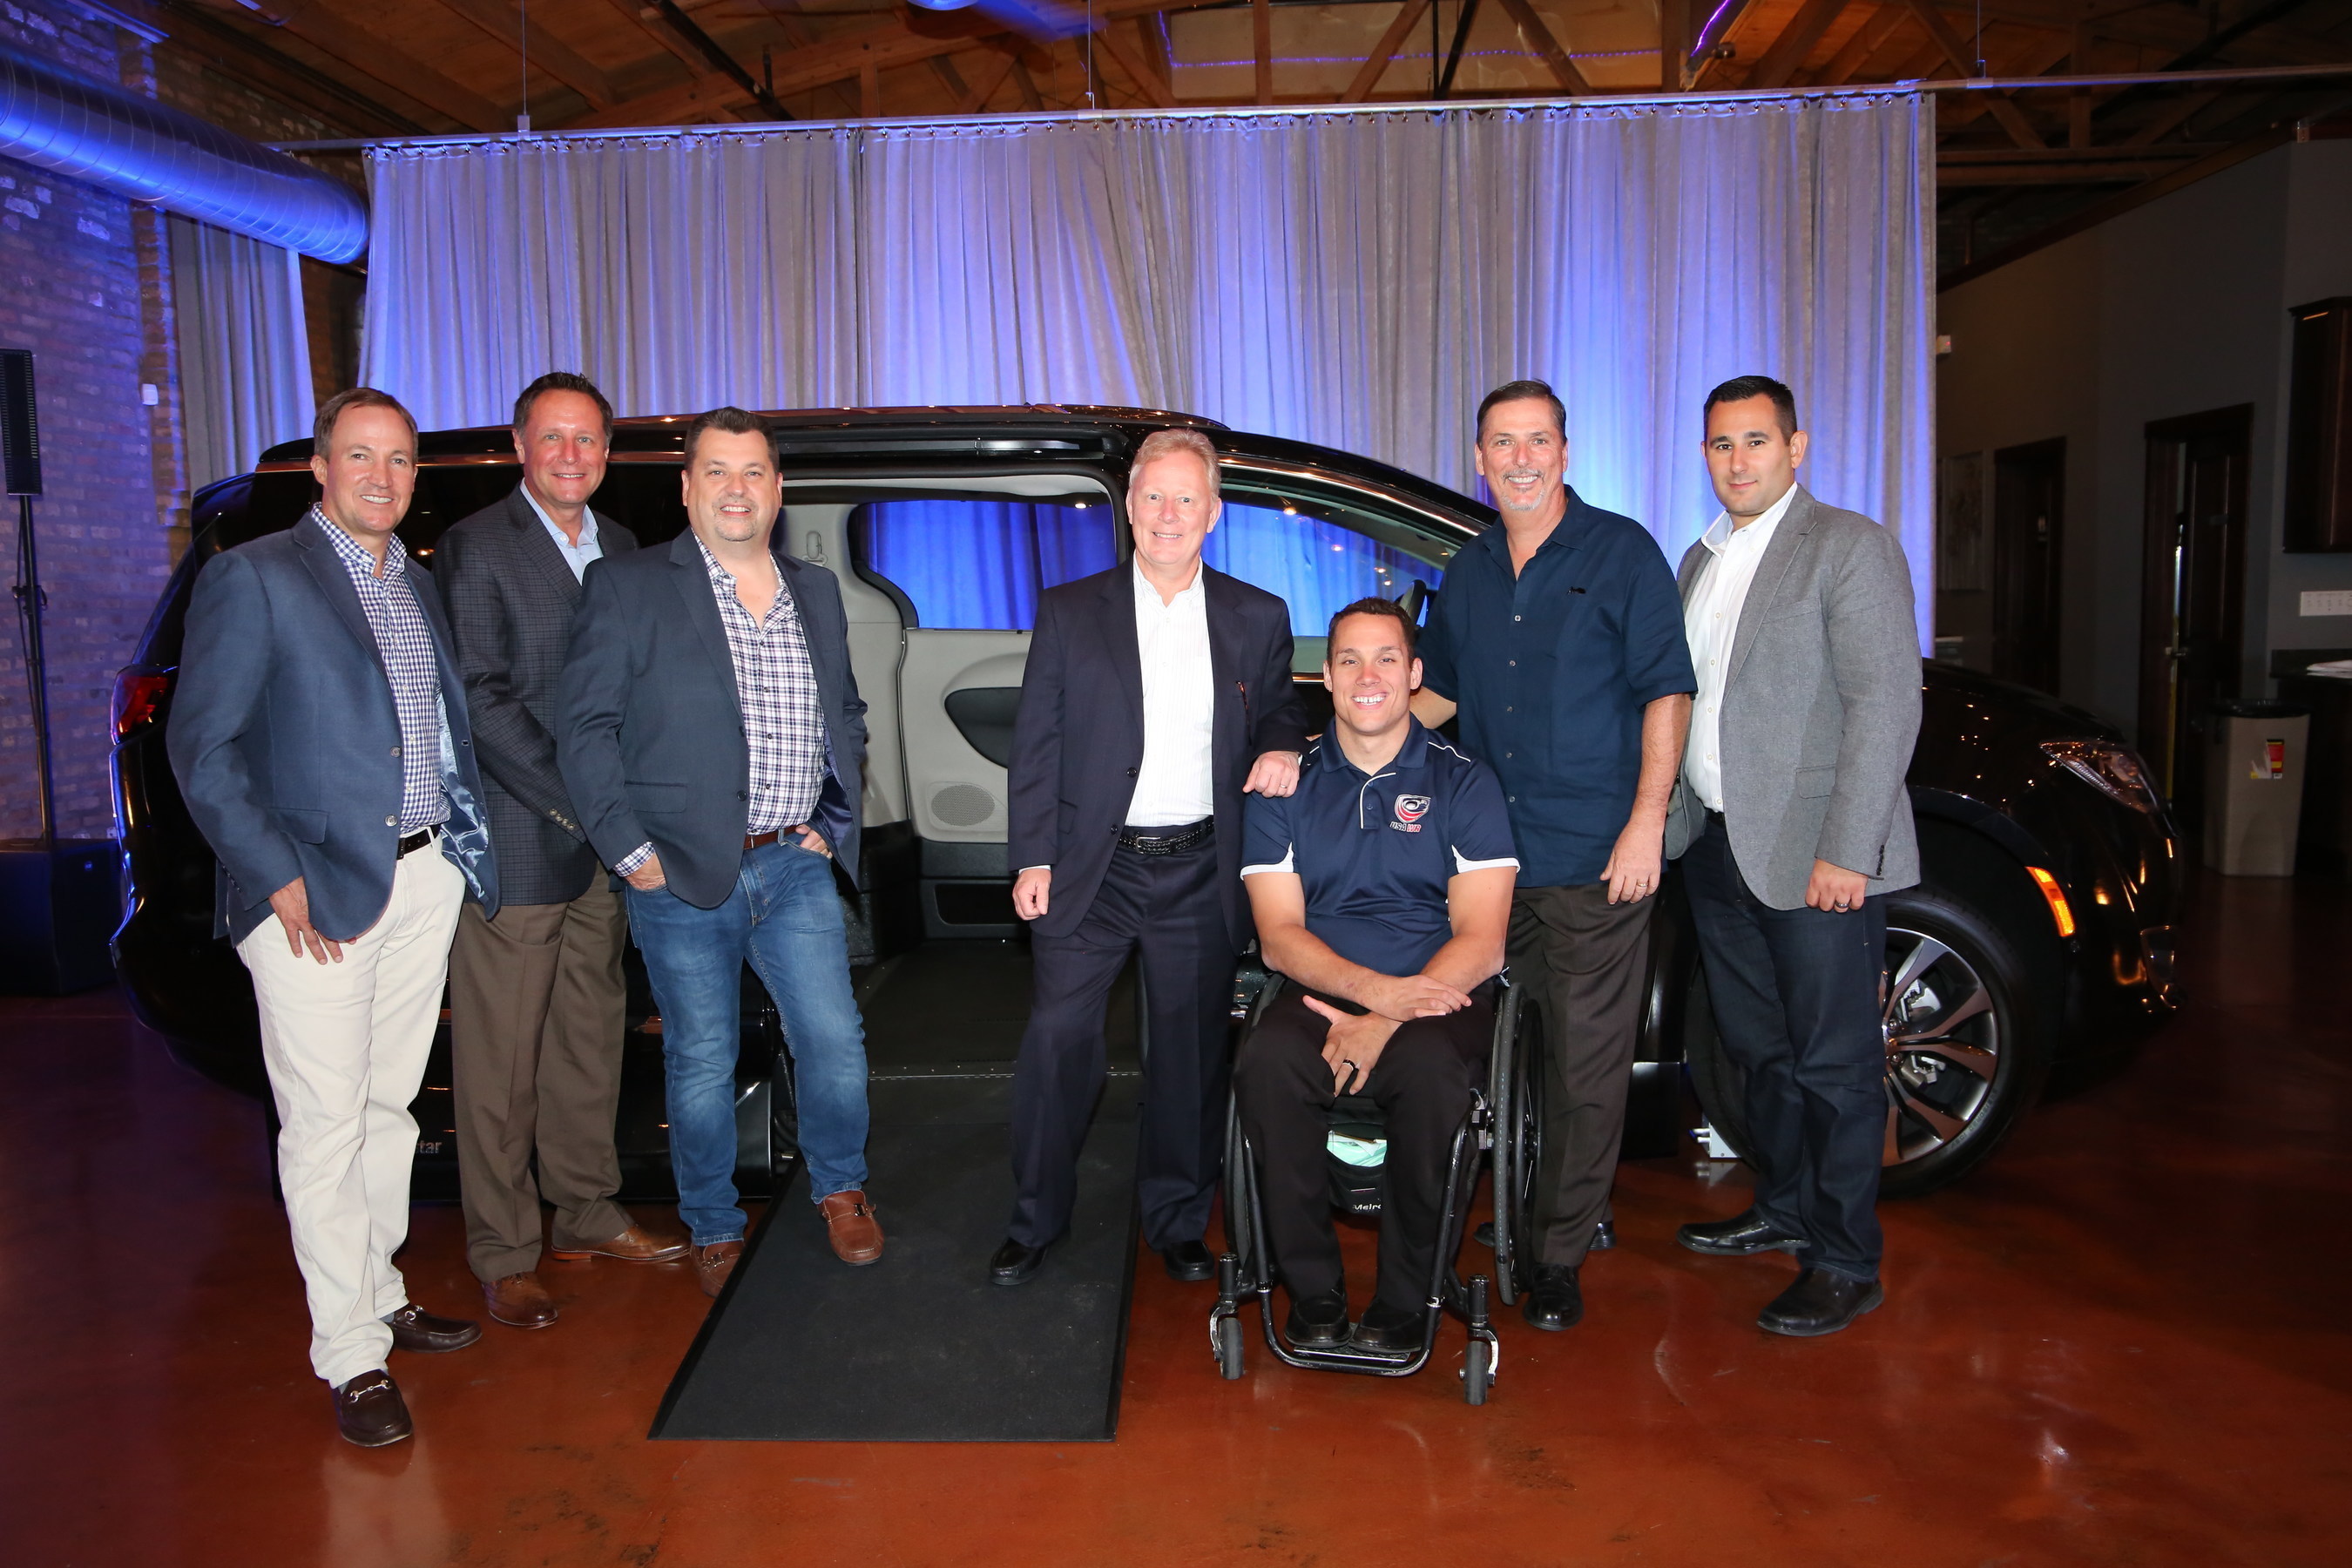 VMI introduces industry's first Chrysler Pacifica side-entry conversion to the Dealer Council Executive Committee in Chicago, Il.  Shown here at the event are from left, Doug Eaton, VMI CEO, Michael Ring, FCA, Steve Crandell, VMI COO, Len Norton, Chairman of VMI Dealer Council, Joe Delgrave, Team USA, Paralympian and new VMI spokesperson, Tim Barone, VMI CFO, and Matt Huber, FCA.